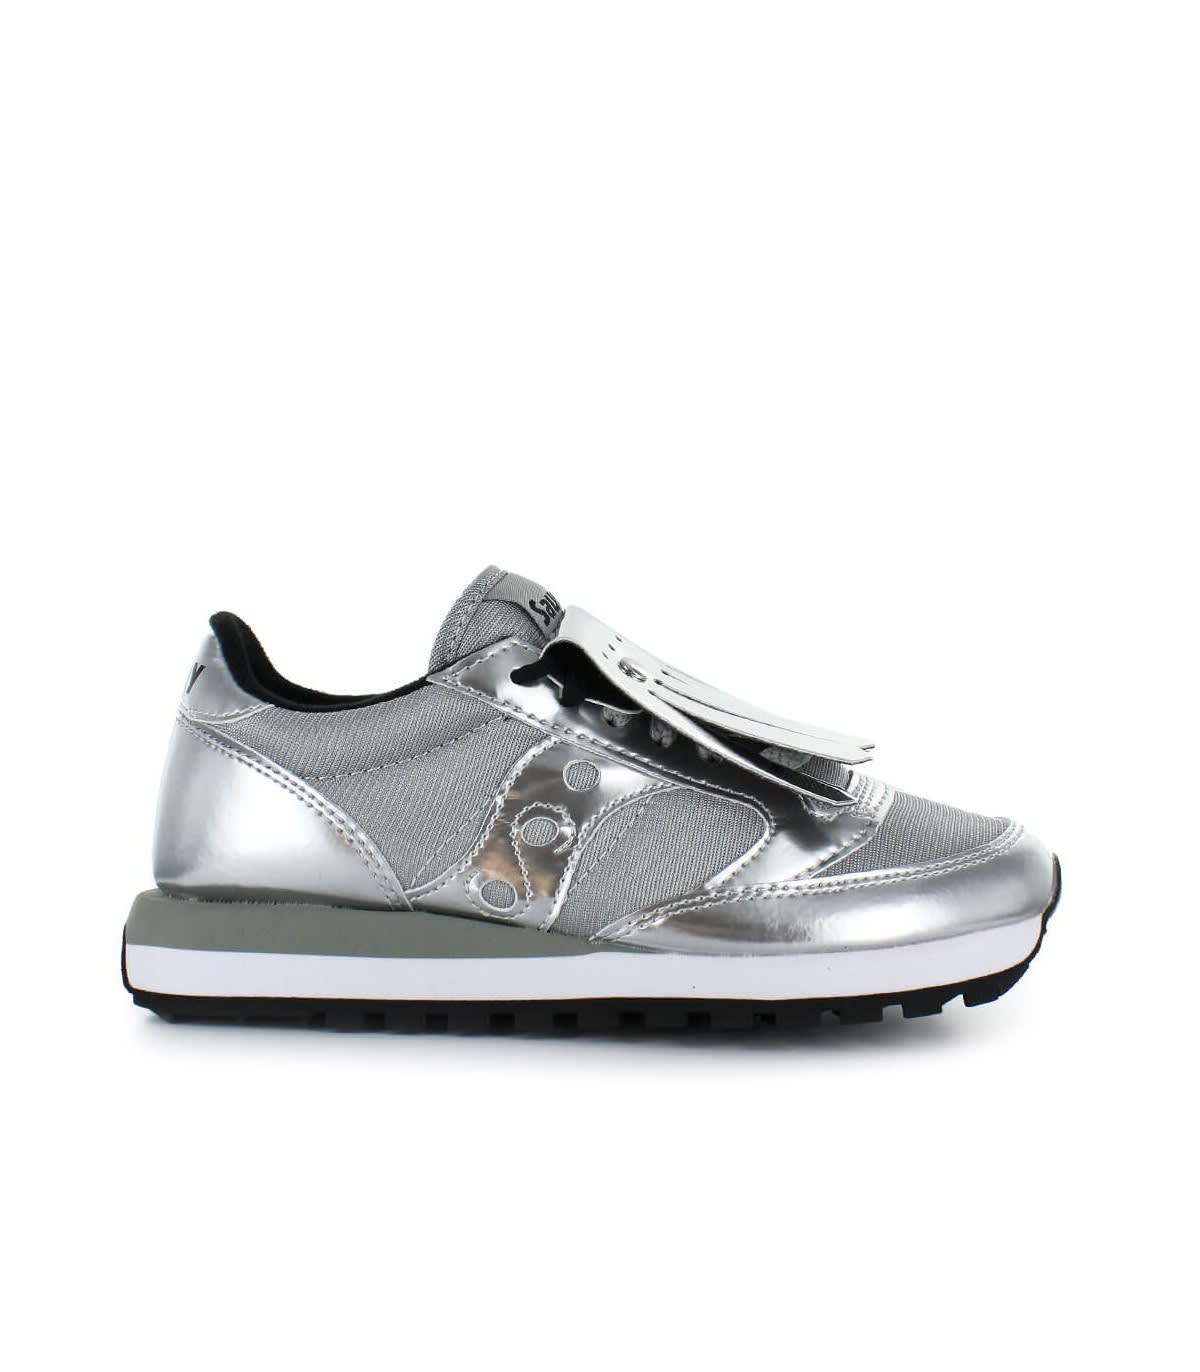 saucony silver limited edition